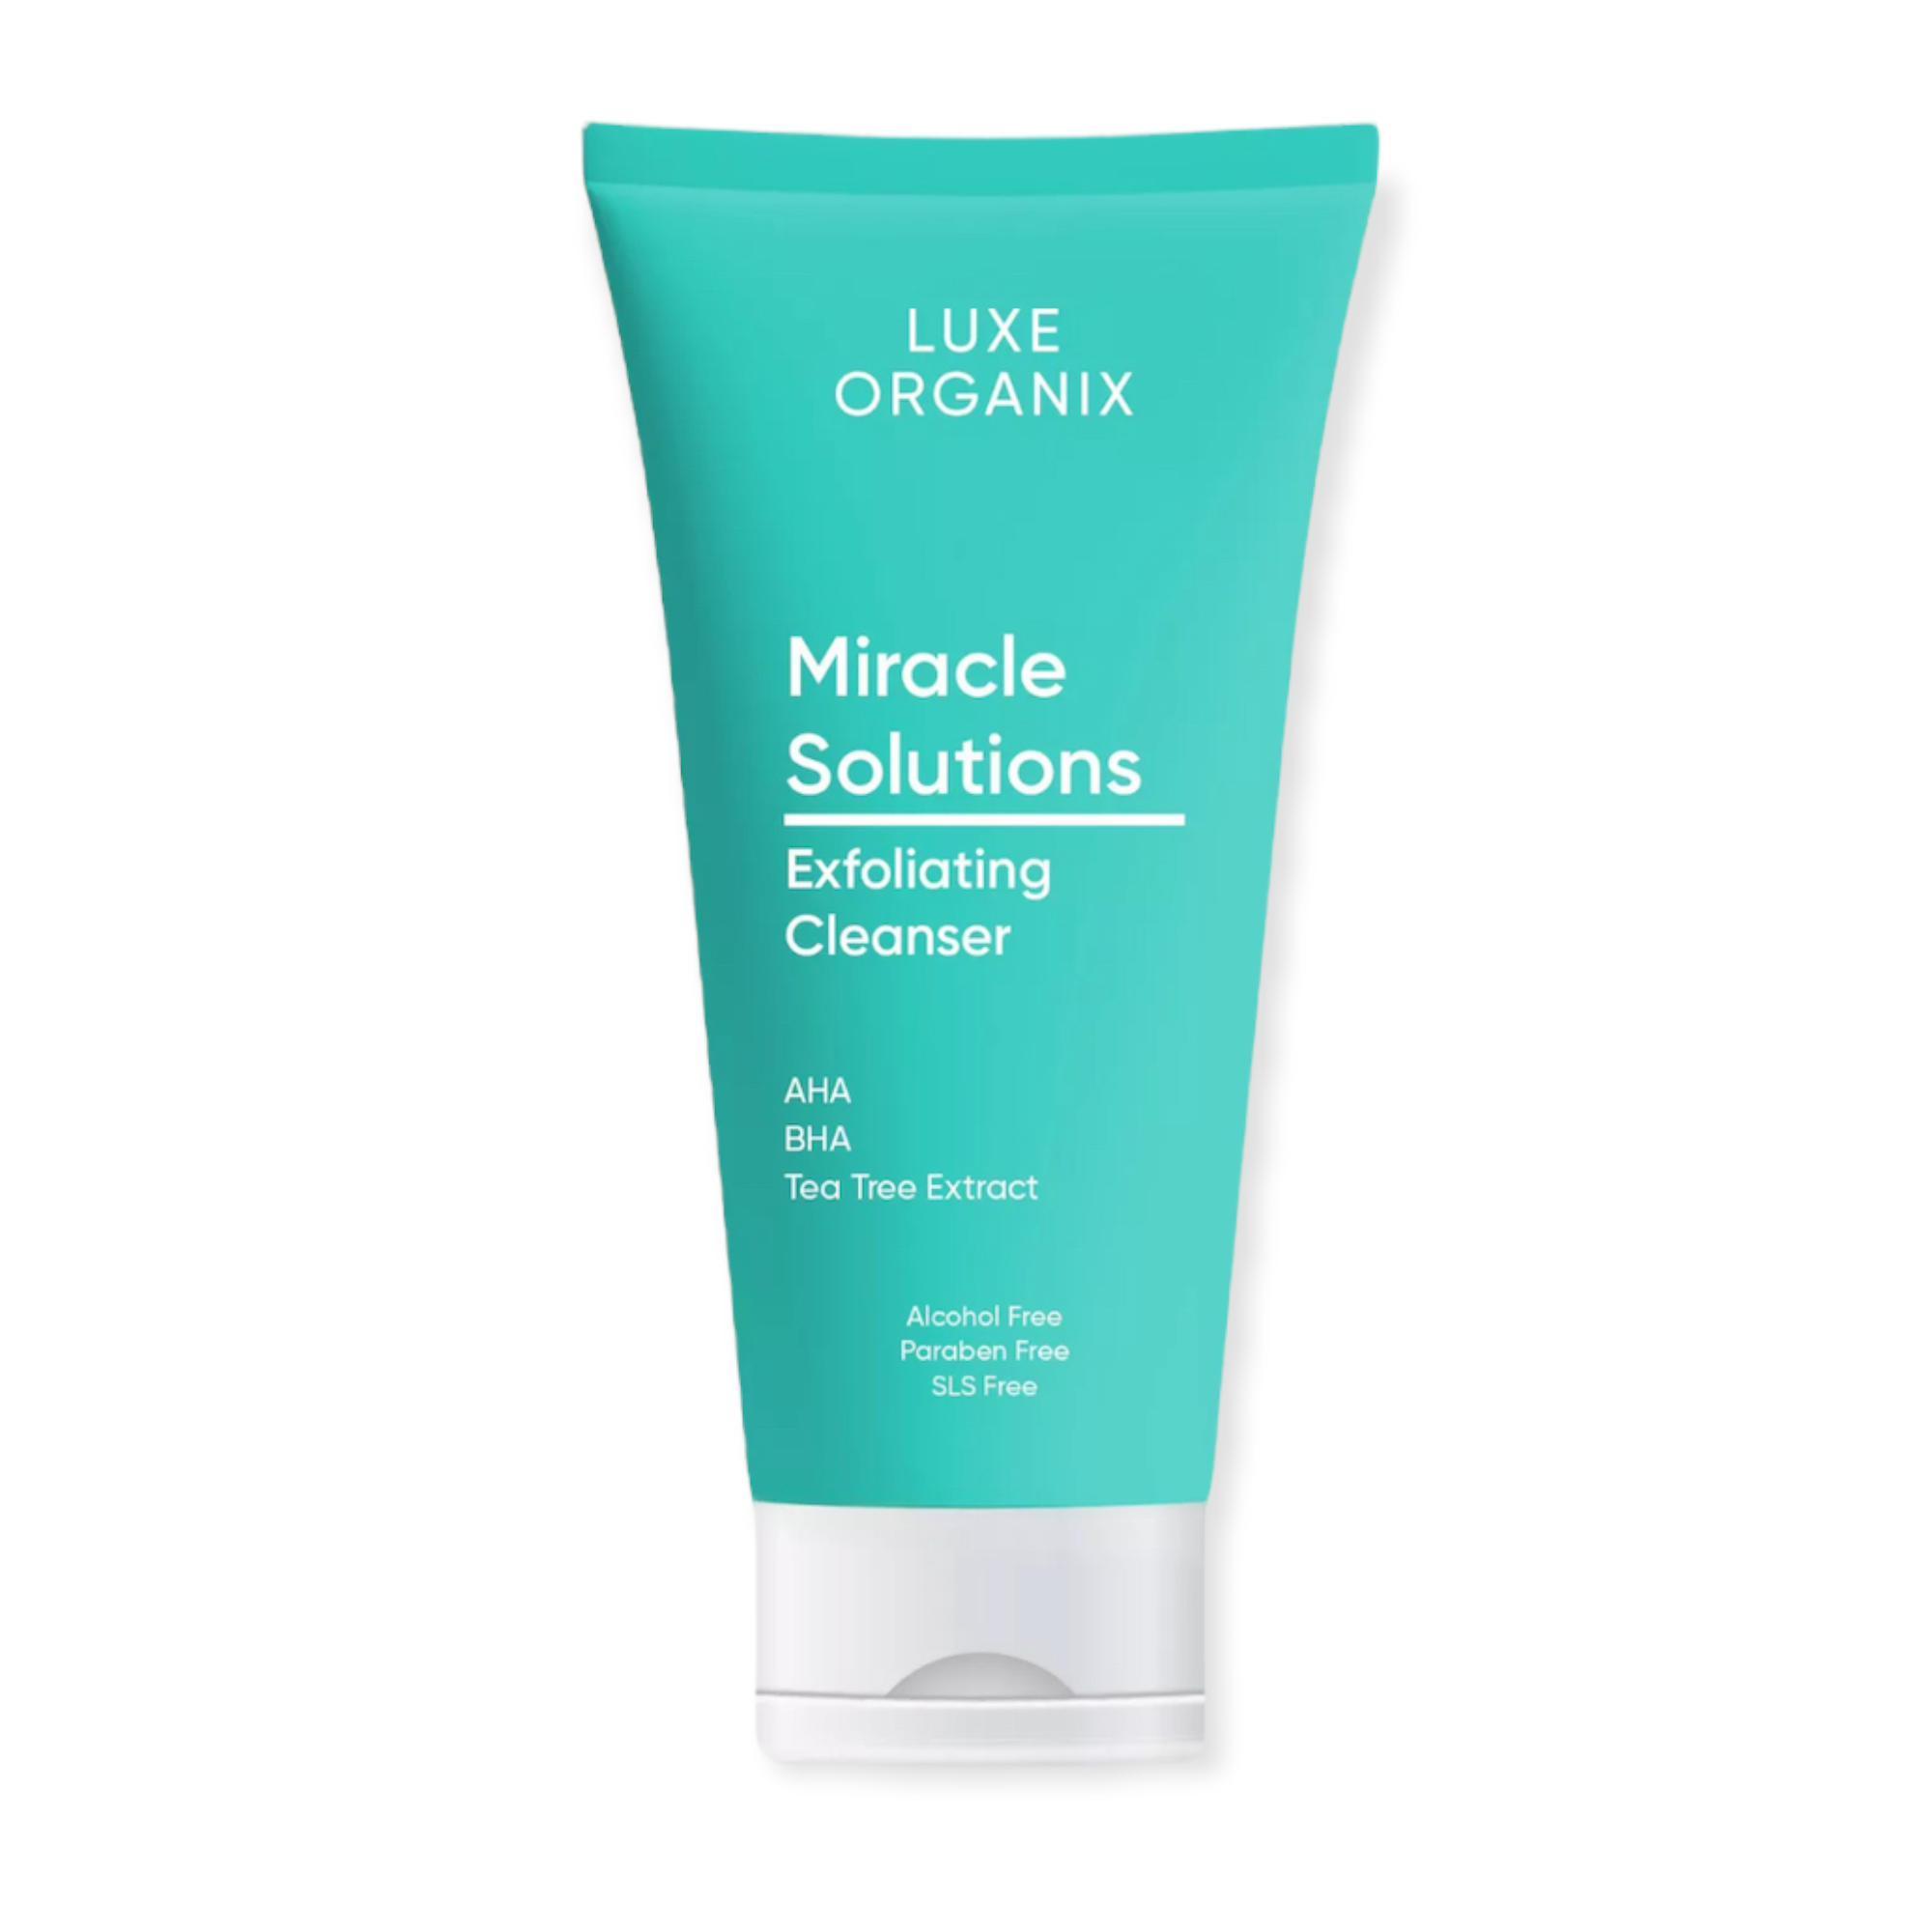 Luxe Organix AHA BHA Miracle Solutions Facial Cleanser 150ml